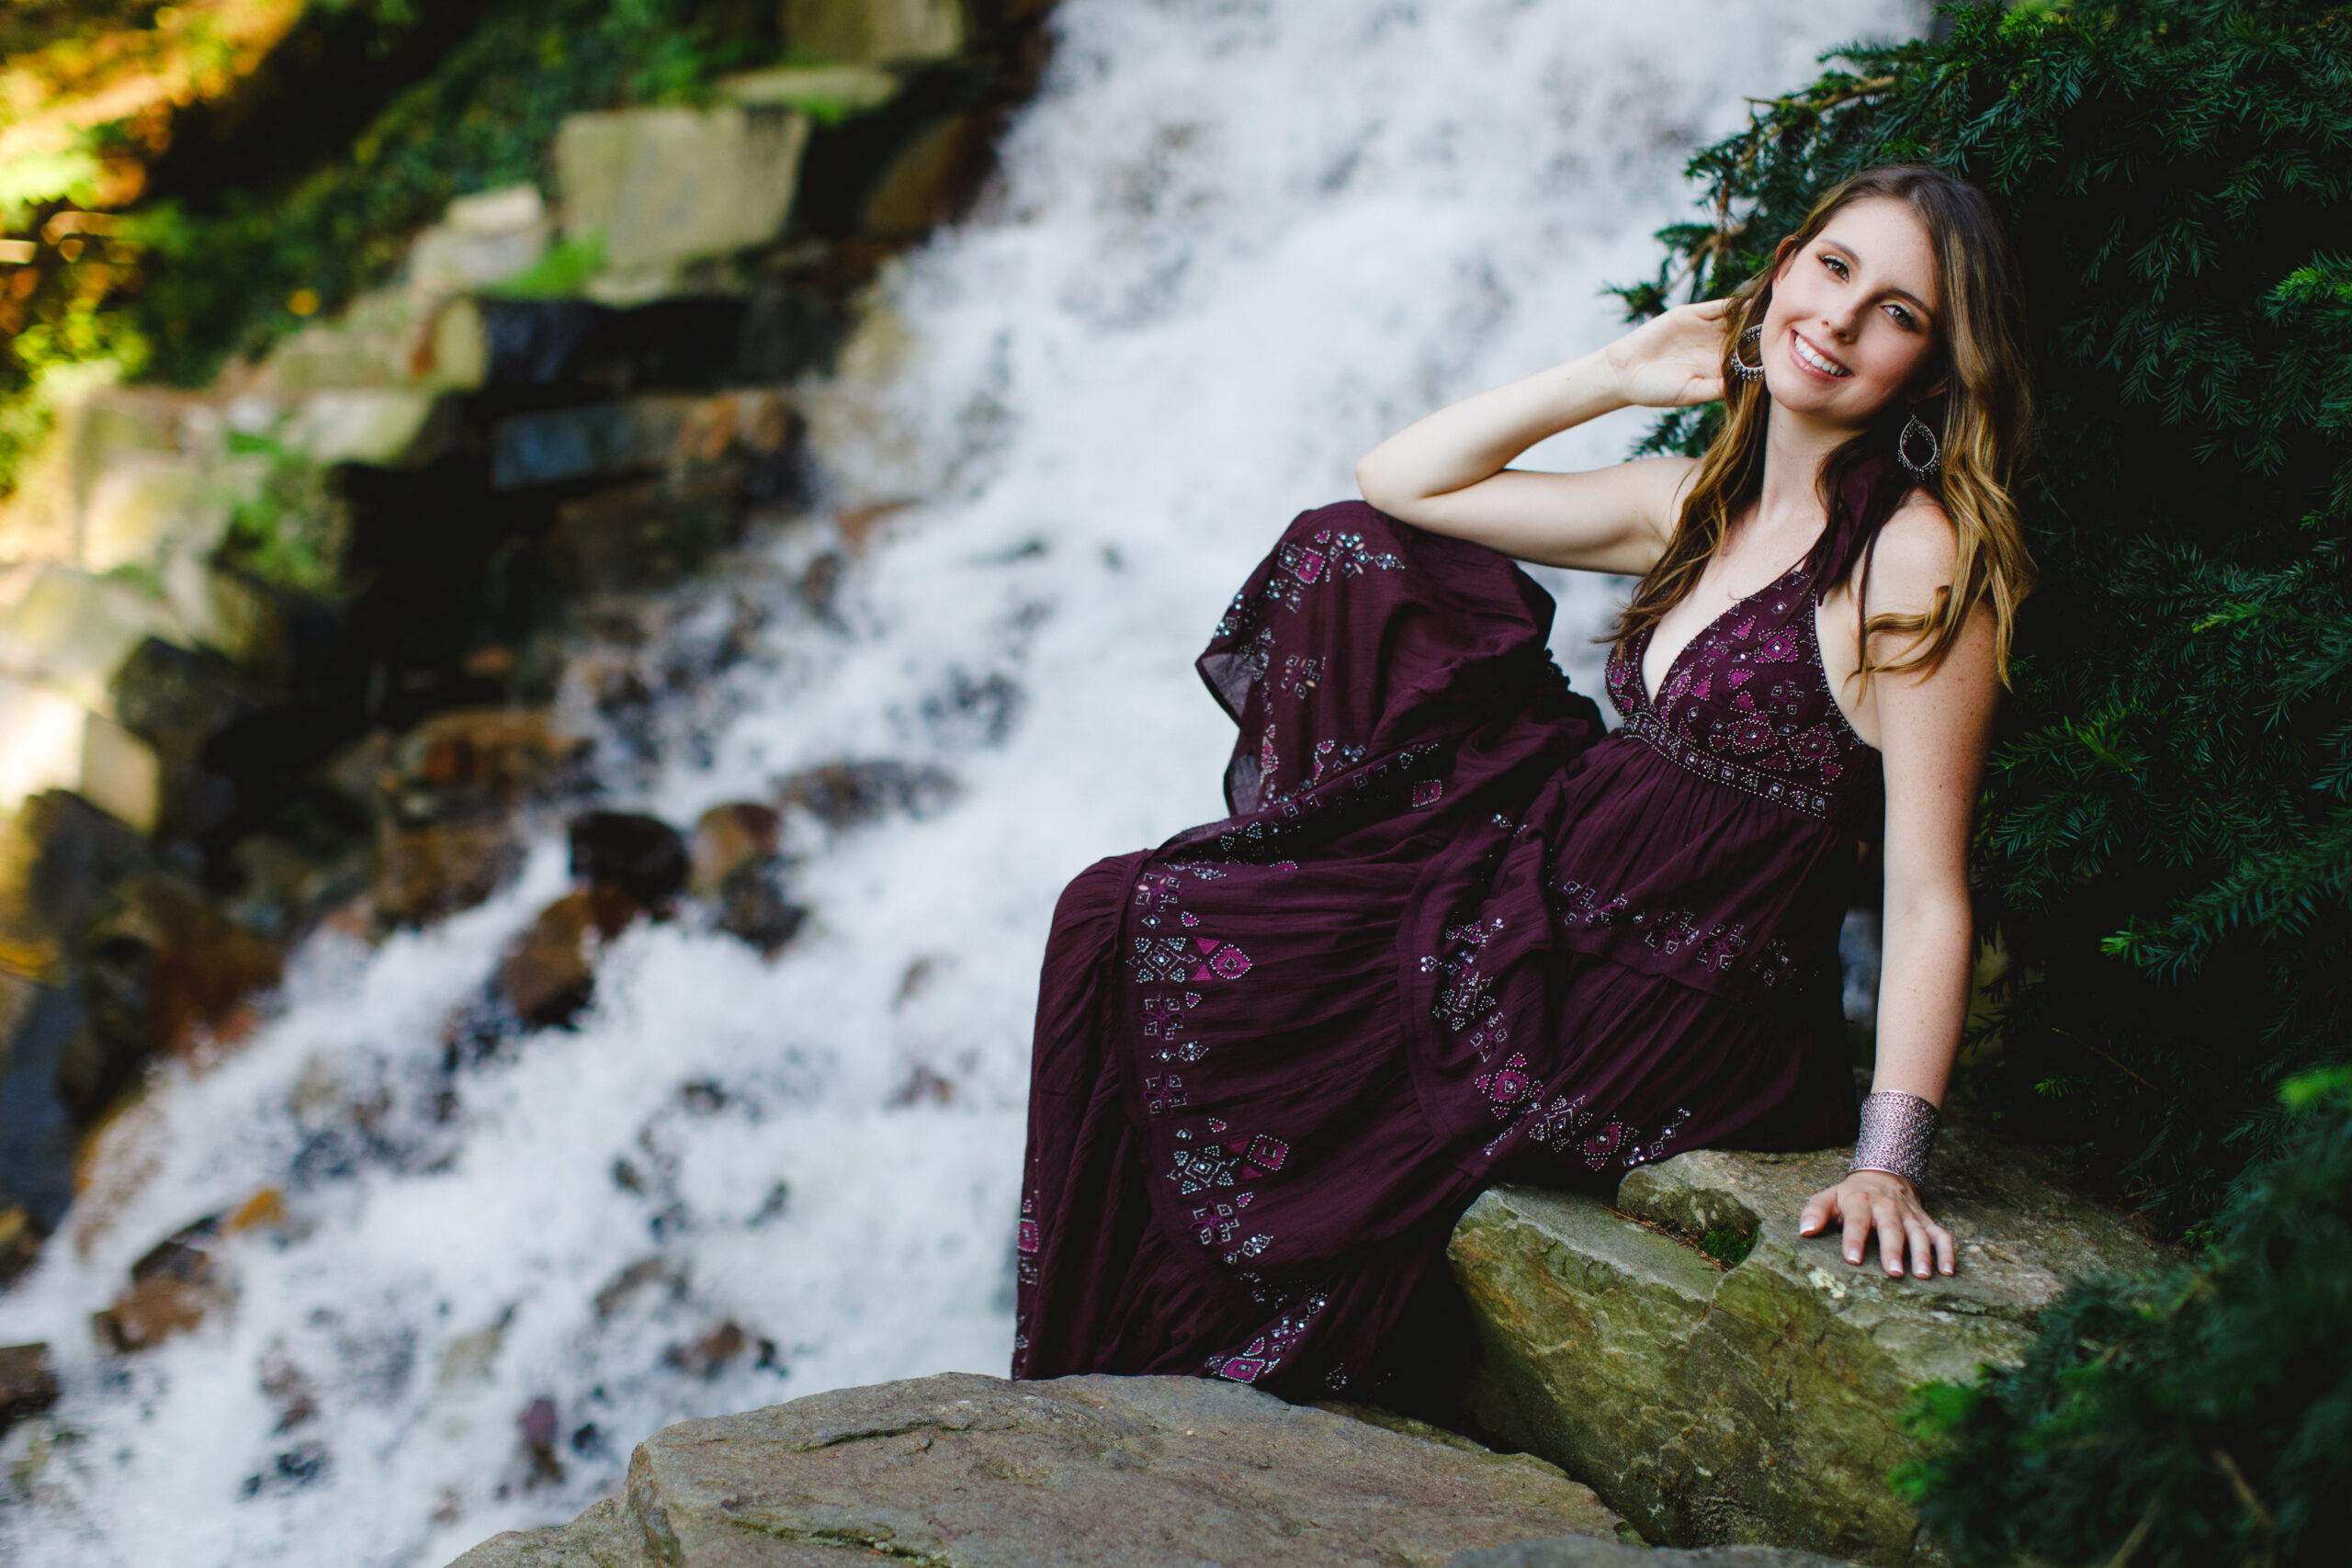 Clare poses seated on a mossy rock with a roaring waterfall in the background at Longwood gardens.